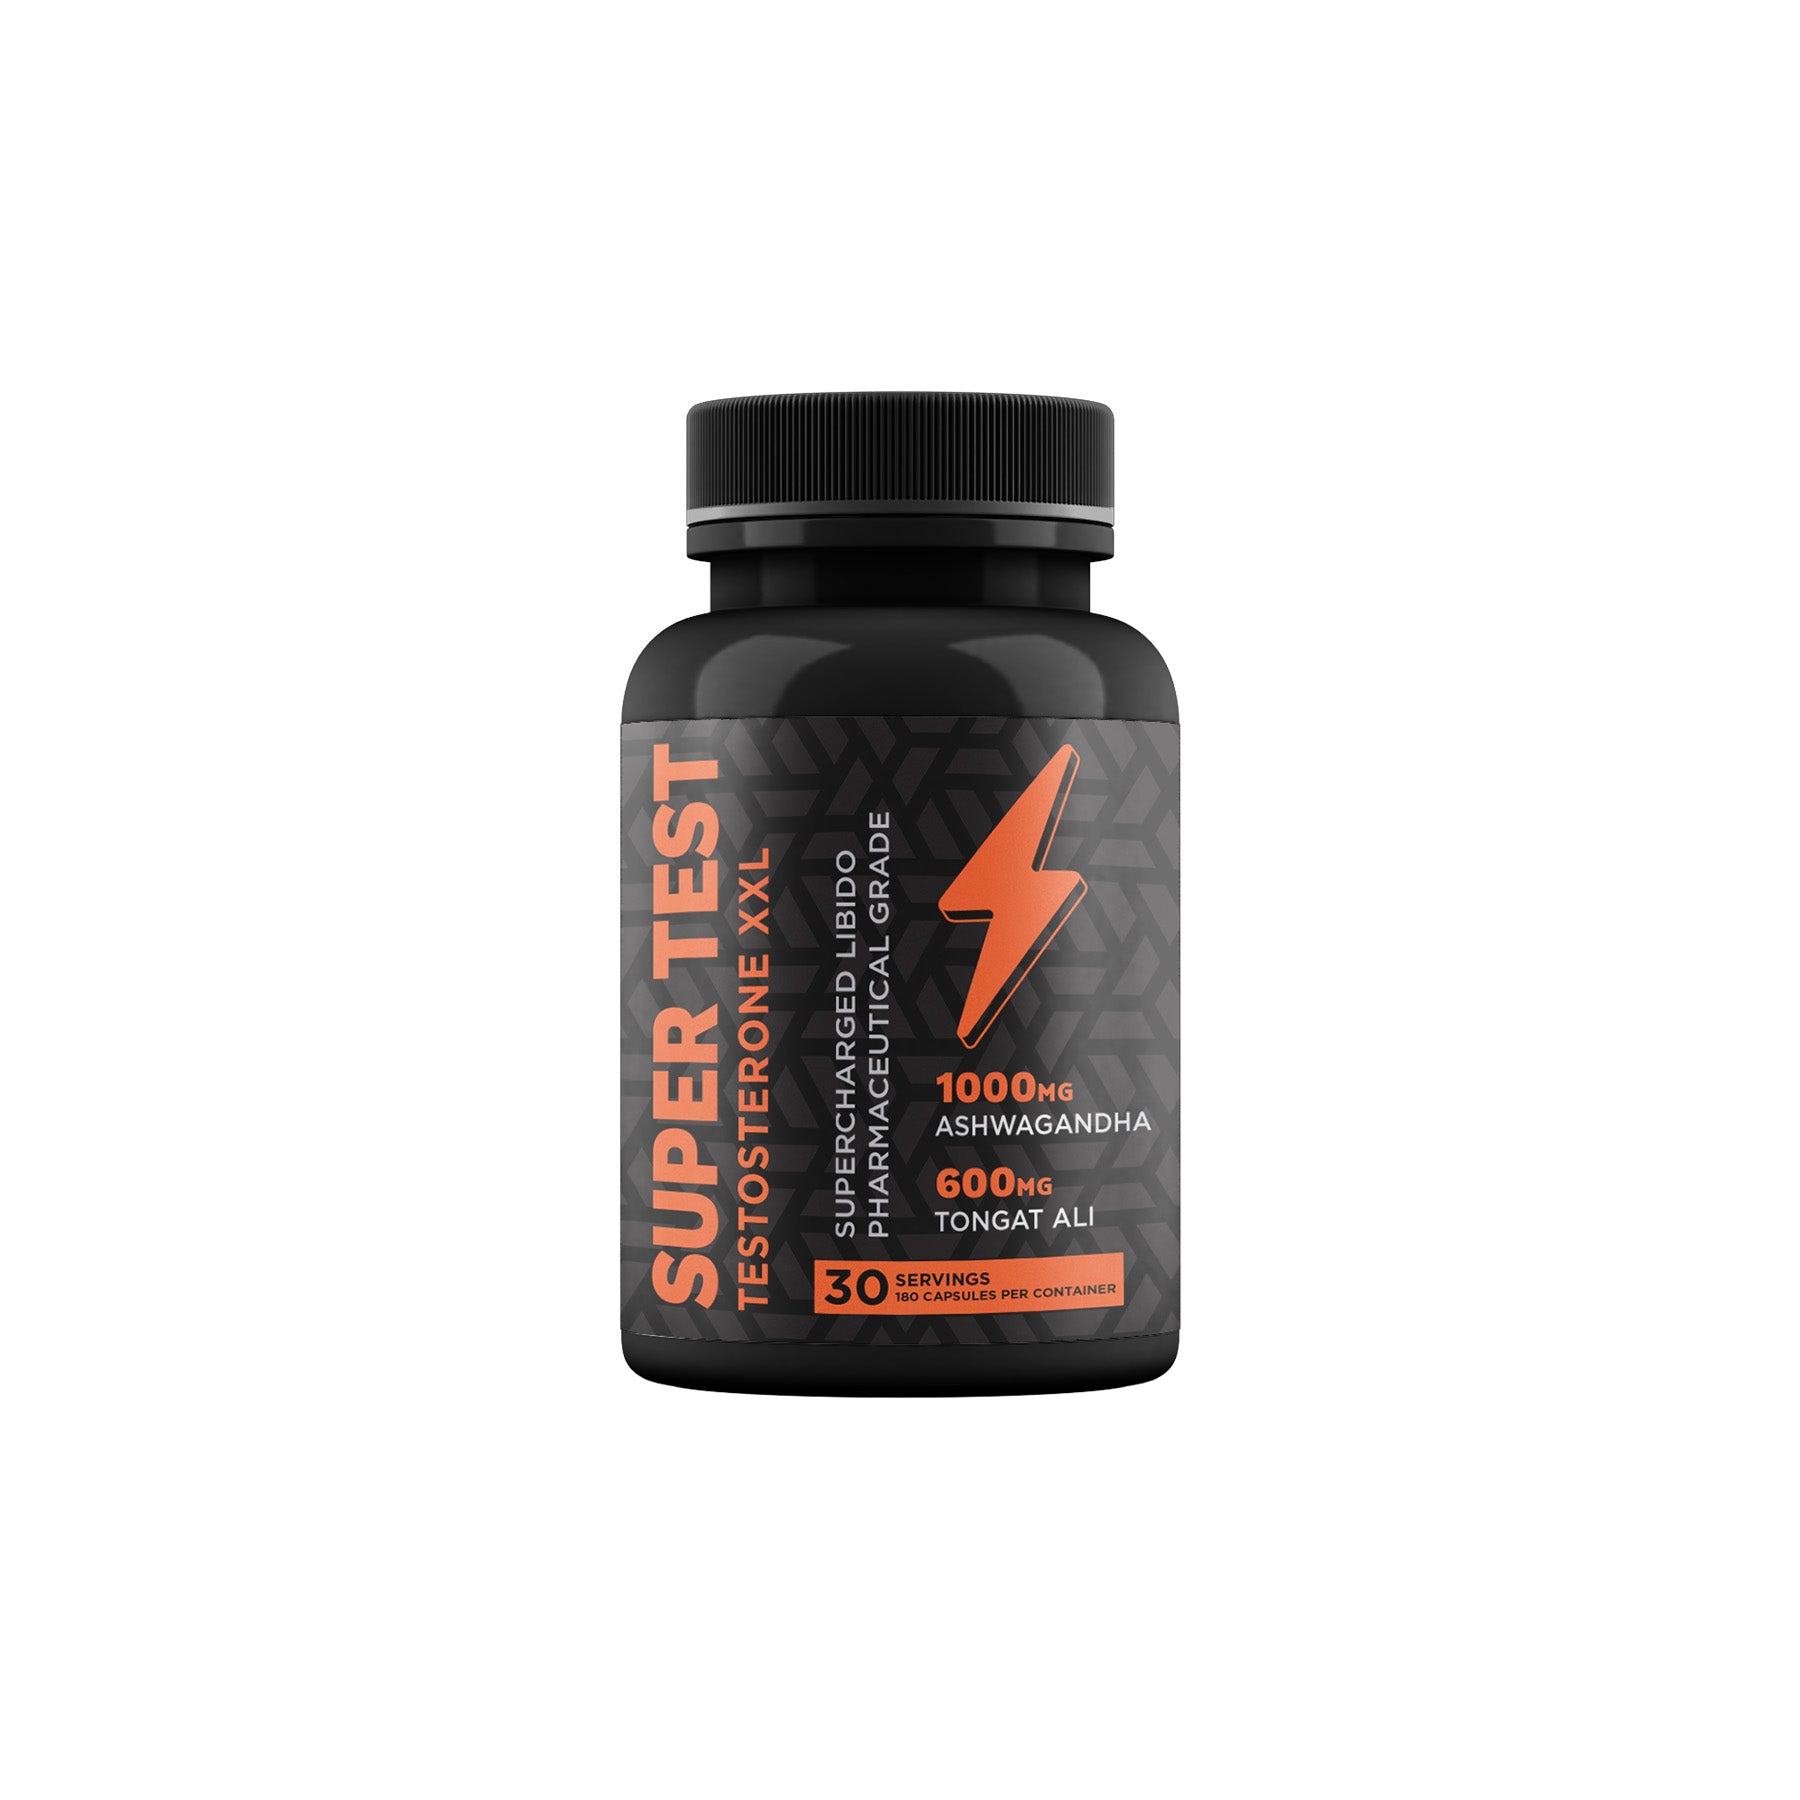 Testosterone booster for men in South Africa.